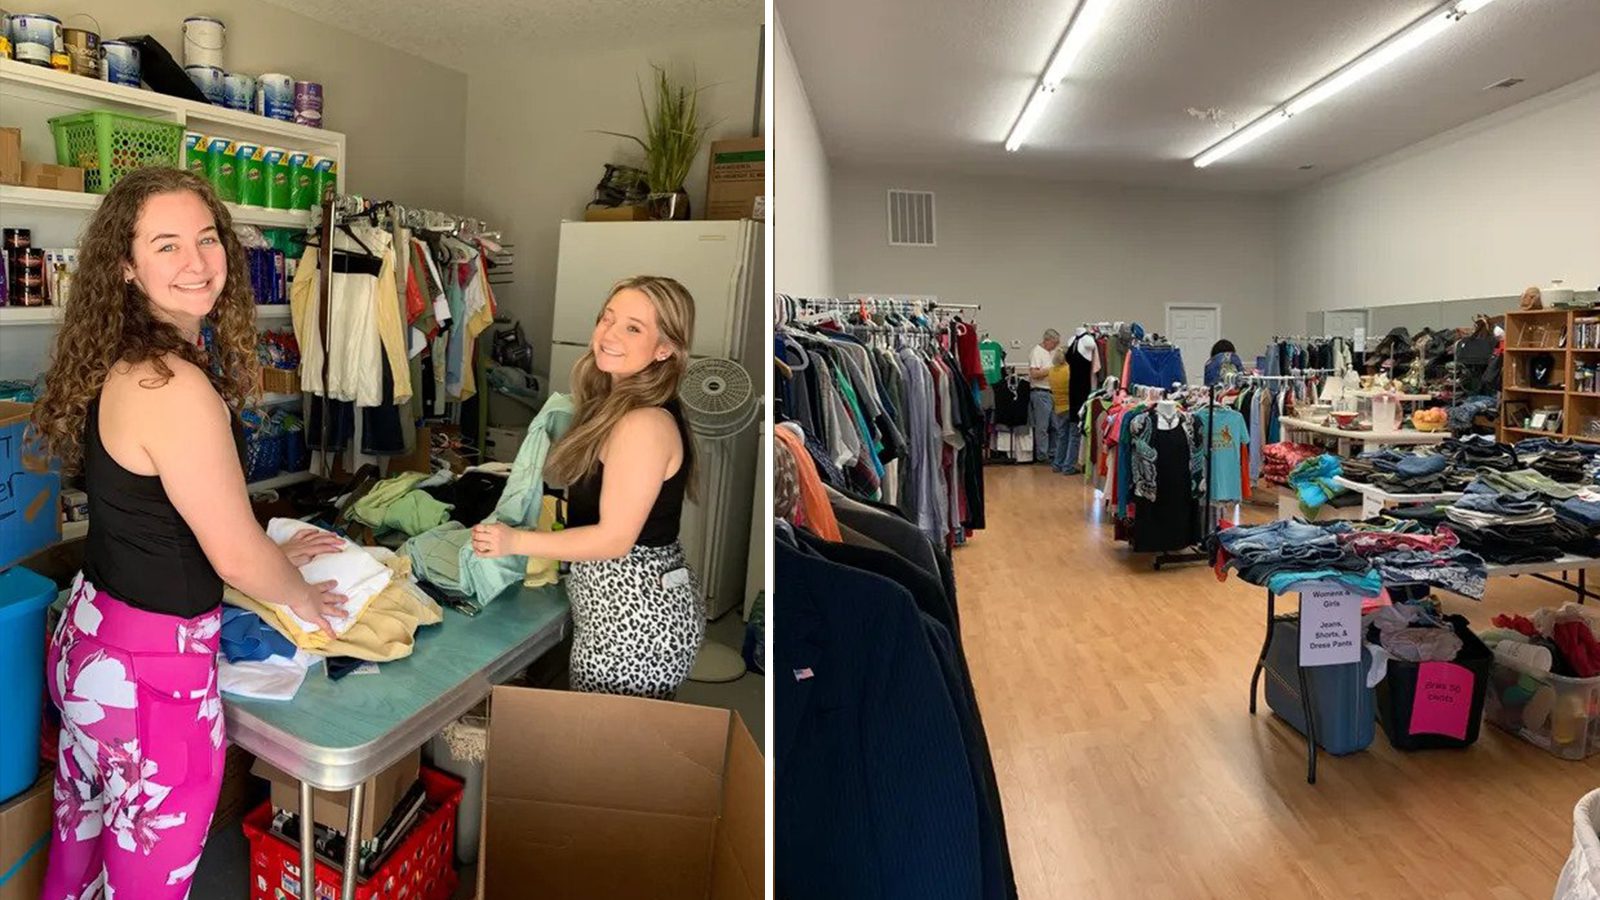 Woman Opens Store to Let Foster Children Shop for Free Clothing